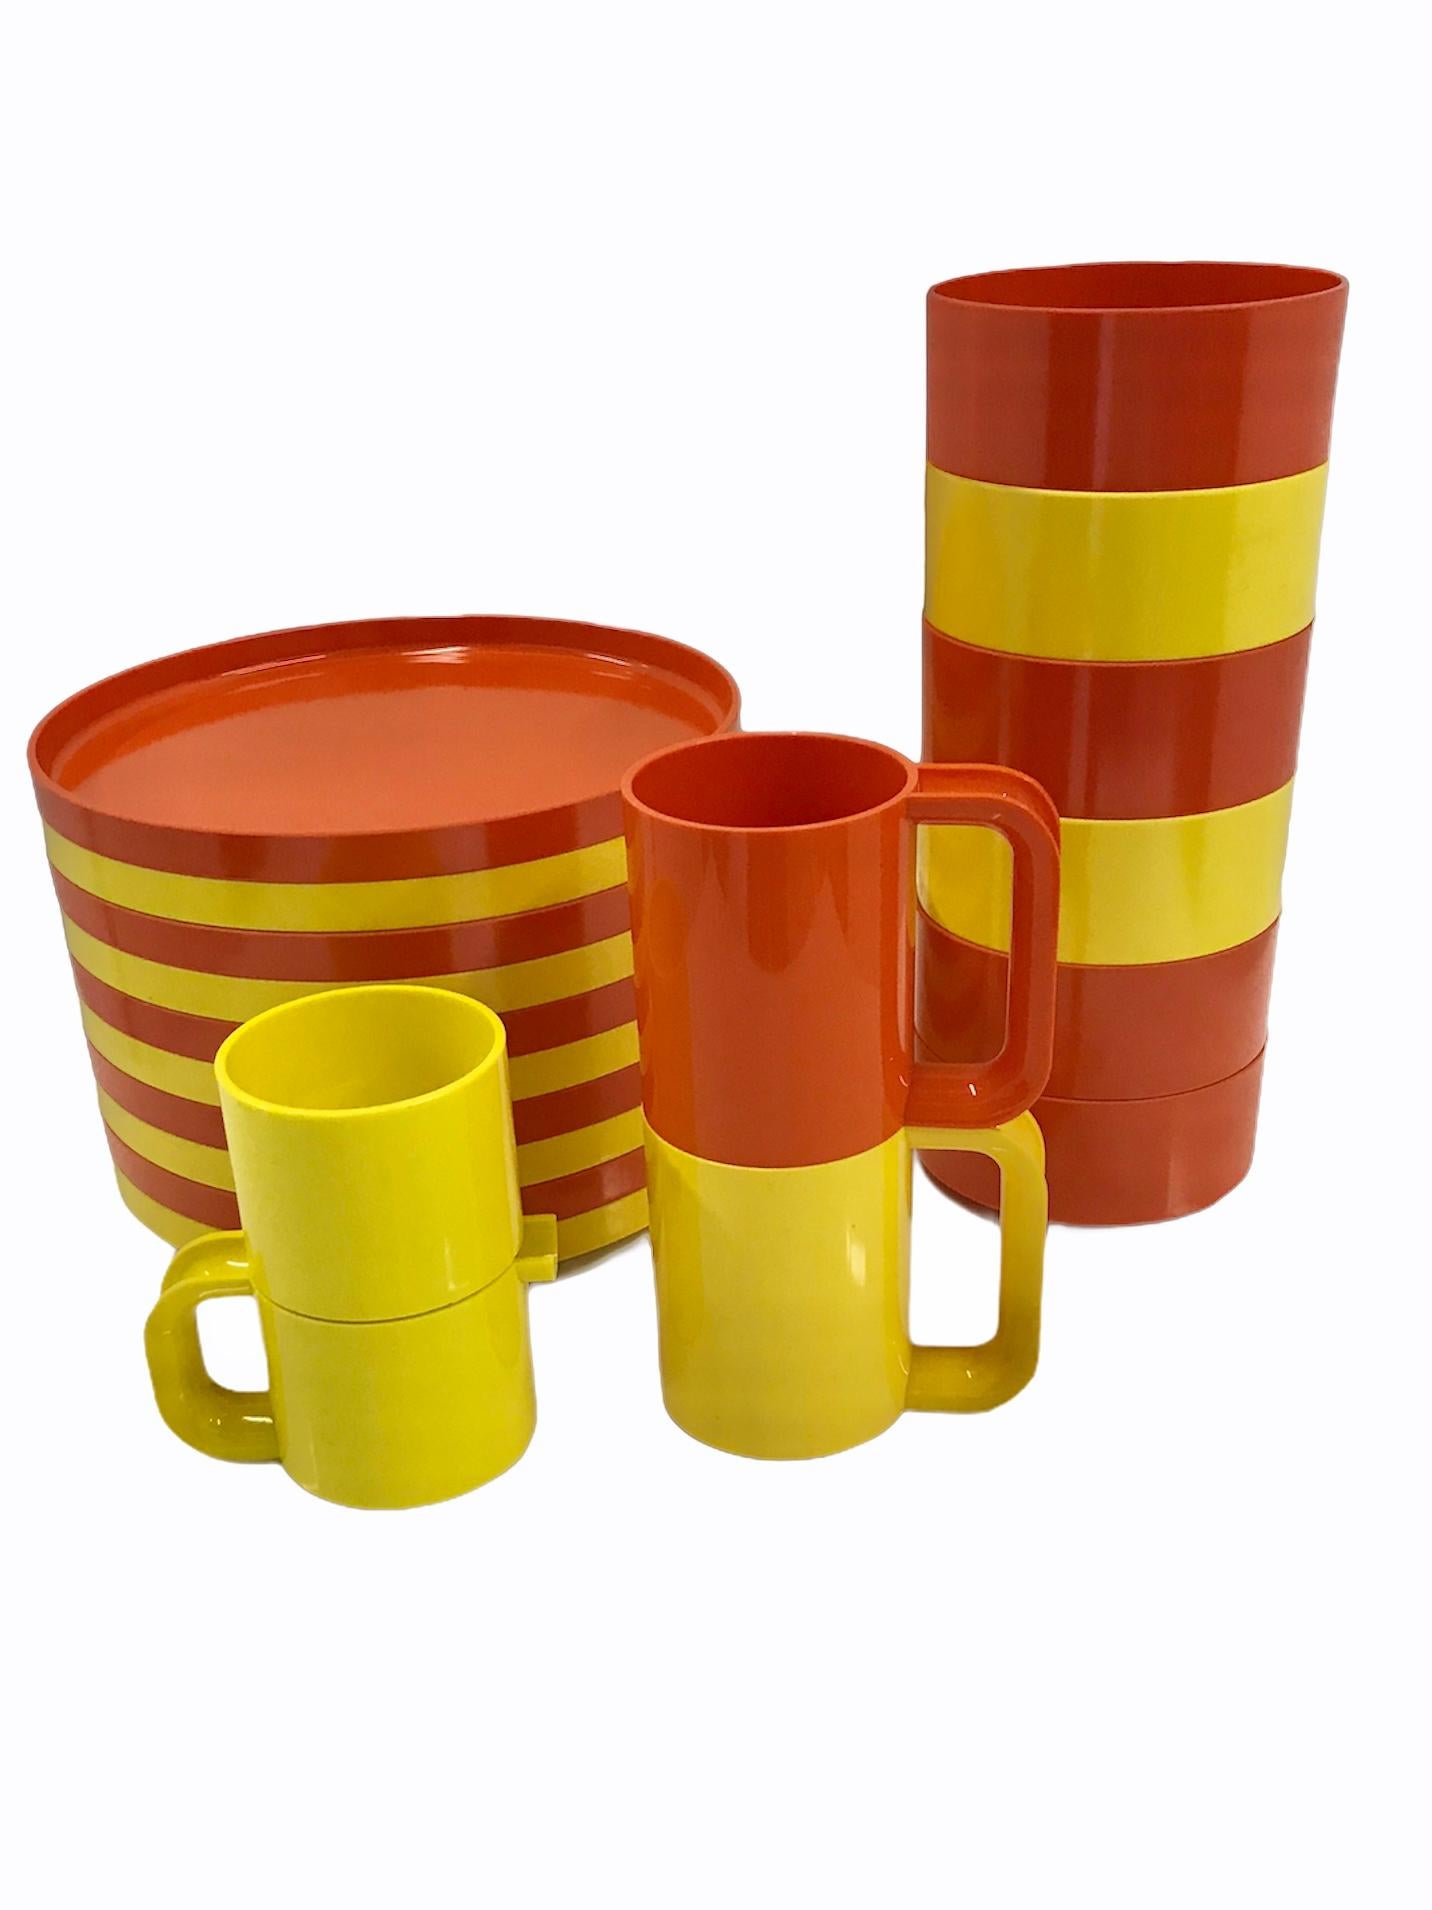 REDUCED FROM $325....Designed by Massimo and Lella Vignelli for Heller in 1964 max 2 yellow and orange ABS dinnerware set. They were originally manufactured in Italy until 1971 when production moved to the United States. All pieces of this